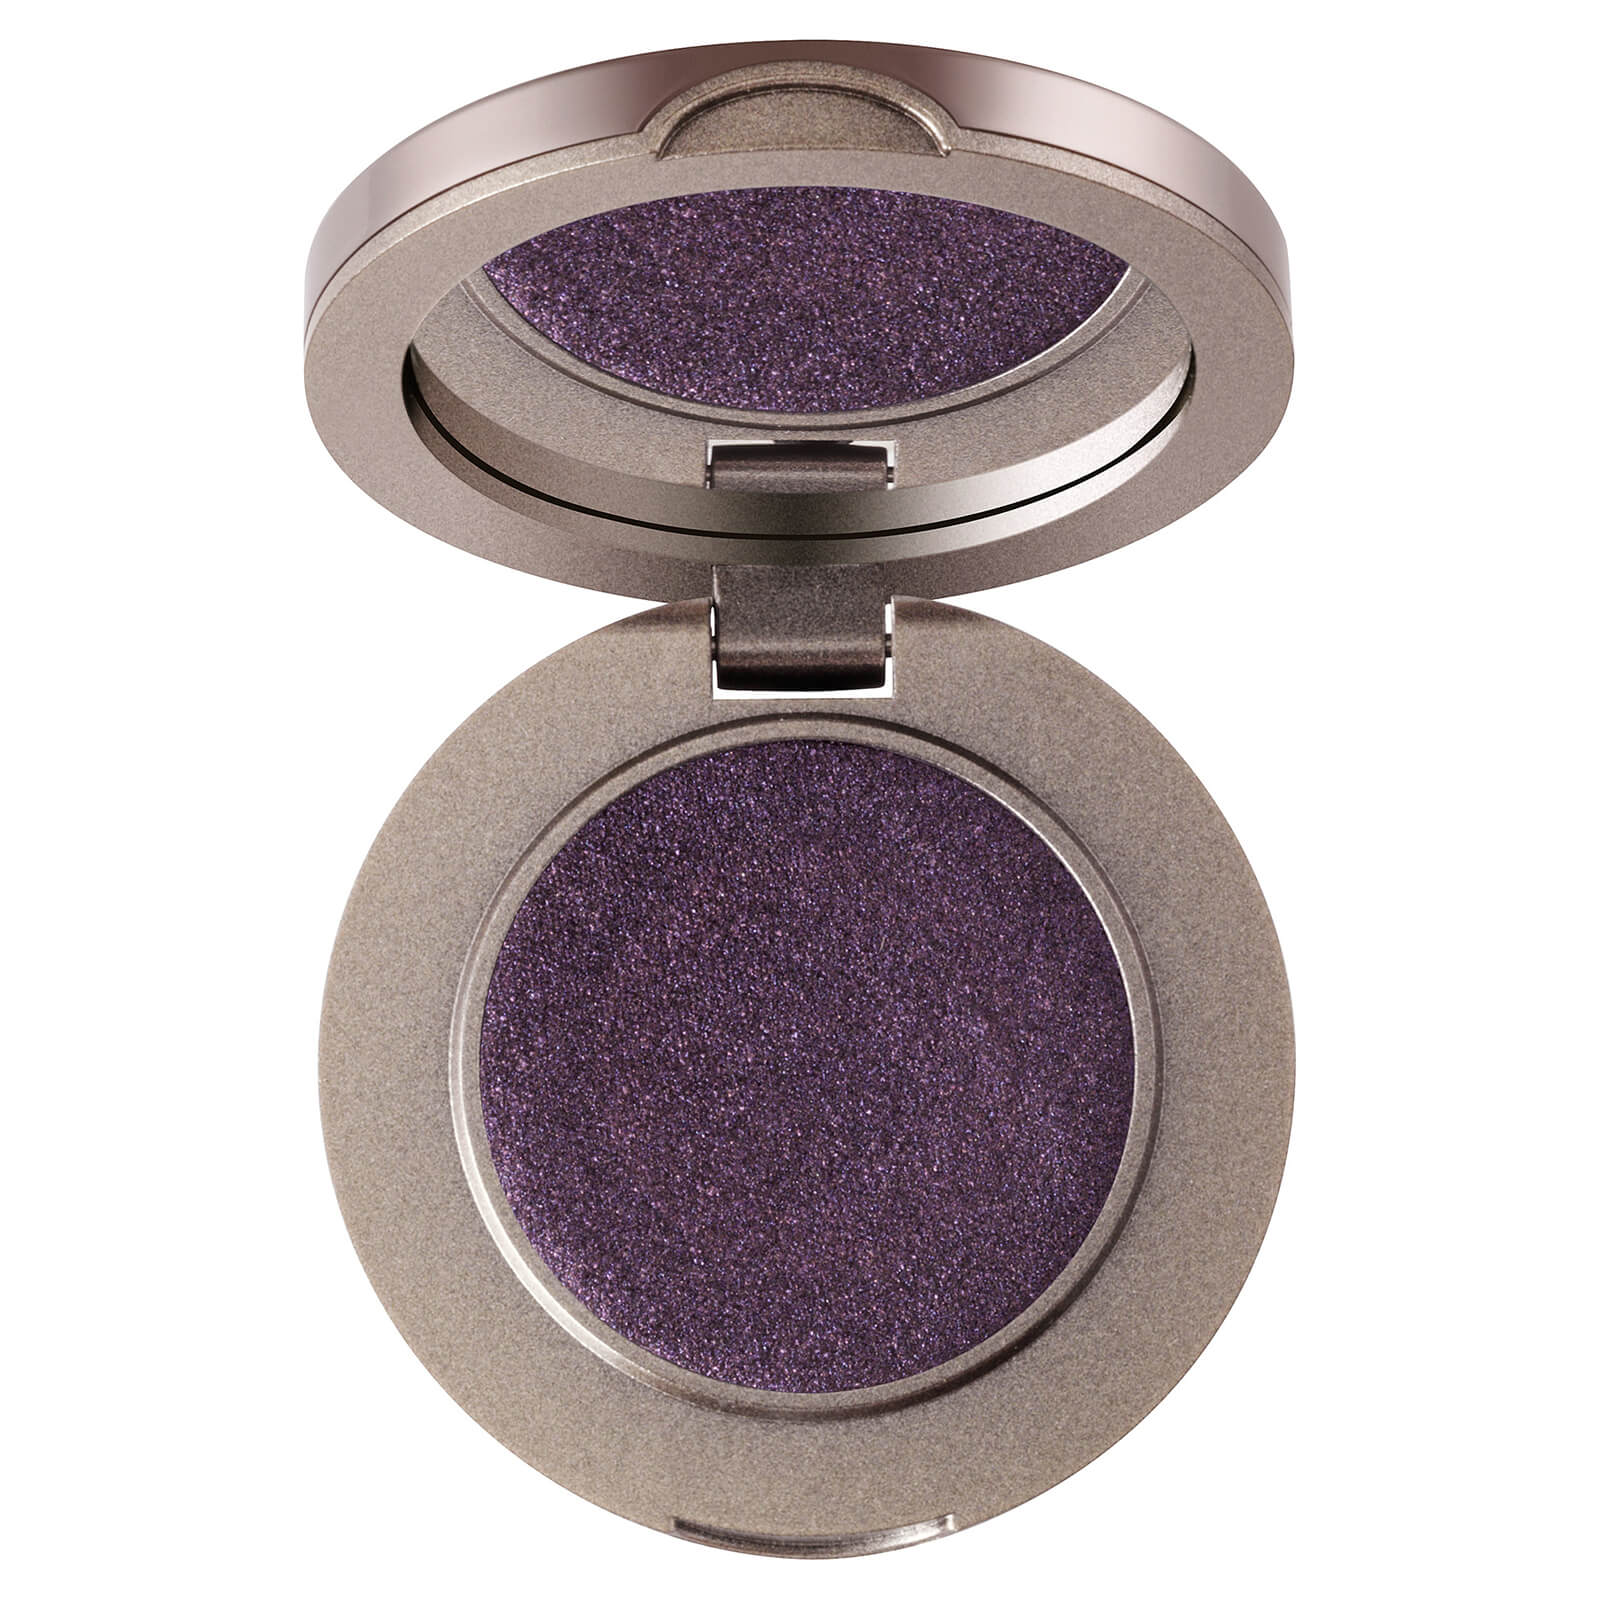 delilah Compact Eye Shadow 1.6g (Various Shades) - 4 Mulberry